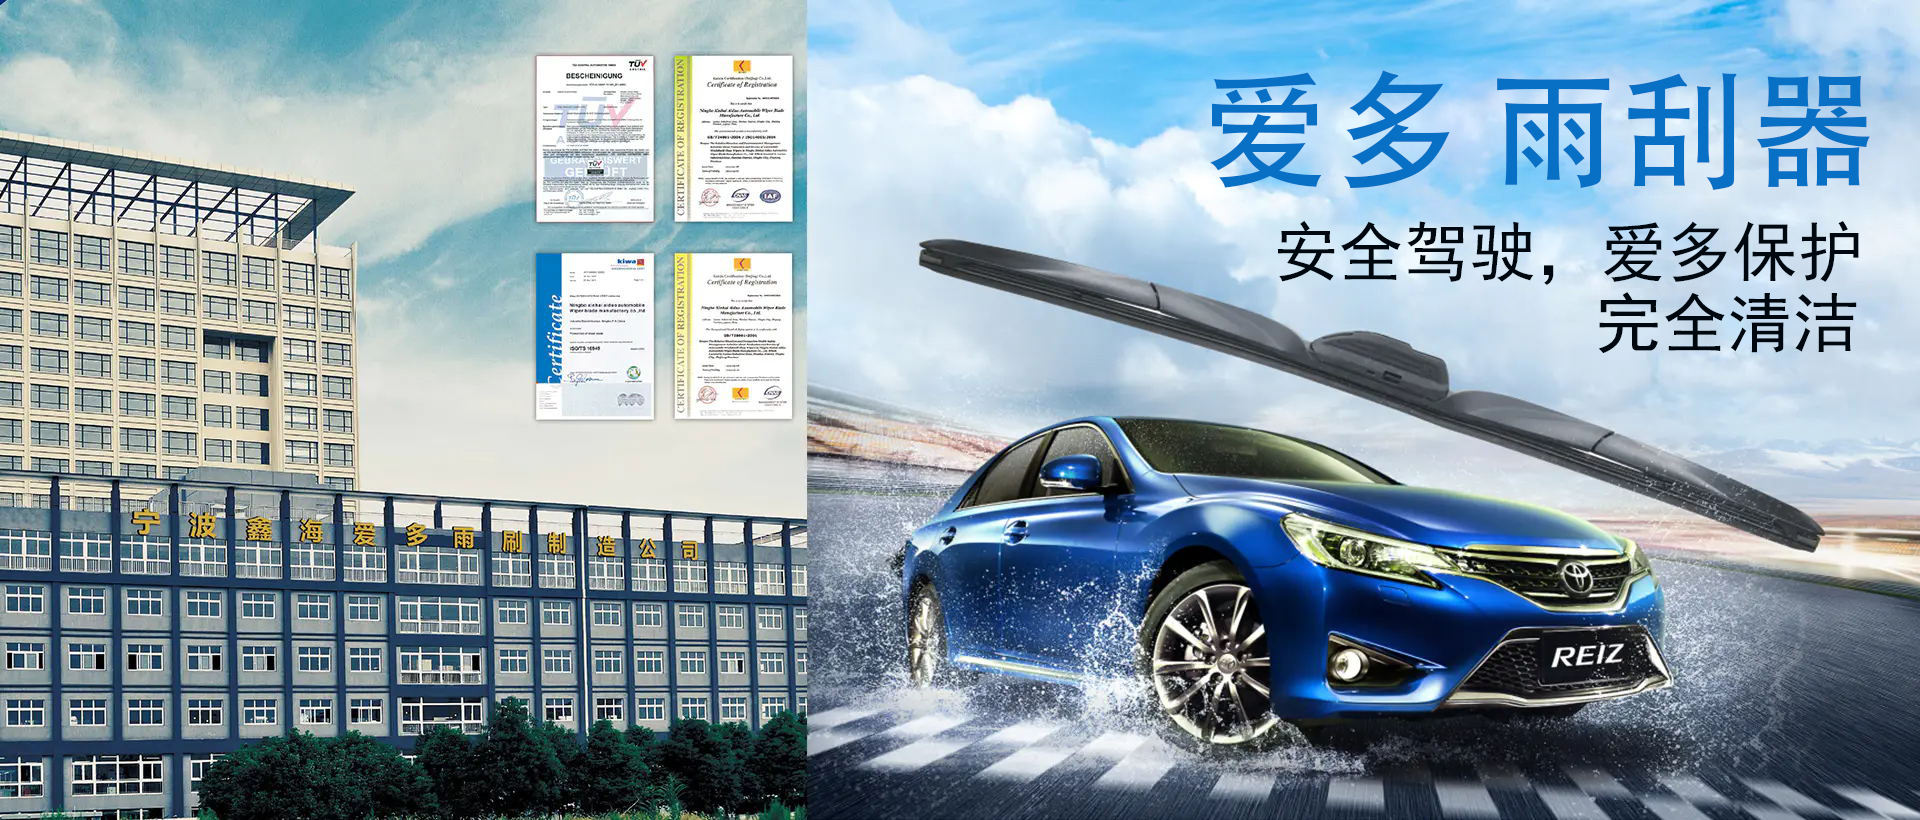 Hybrid wiper blades reduces wind lift and noise during high-speed driving